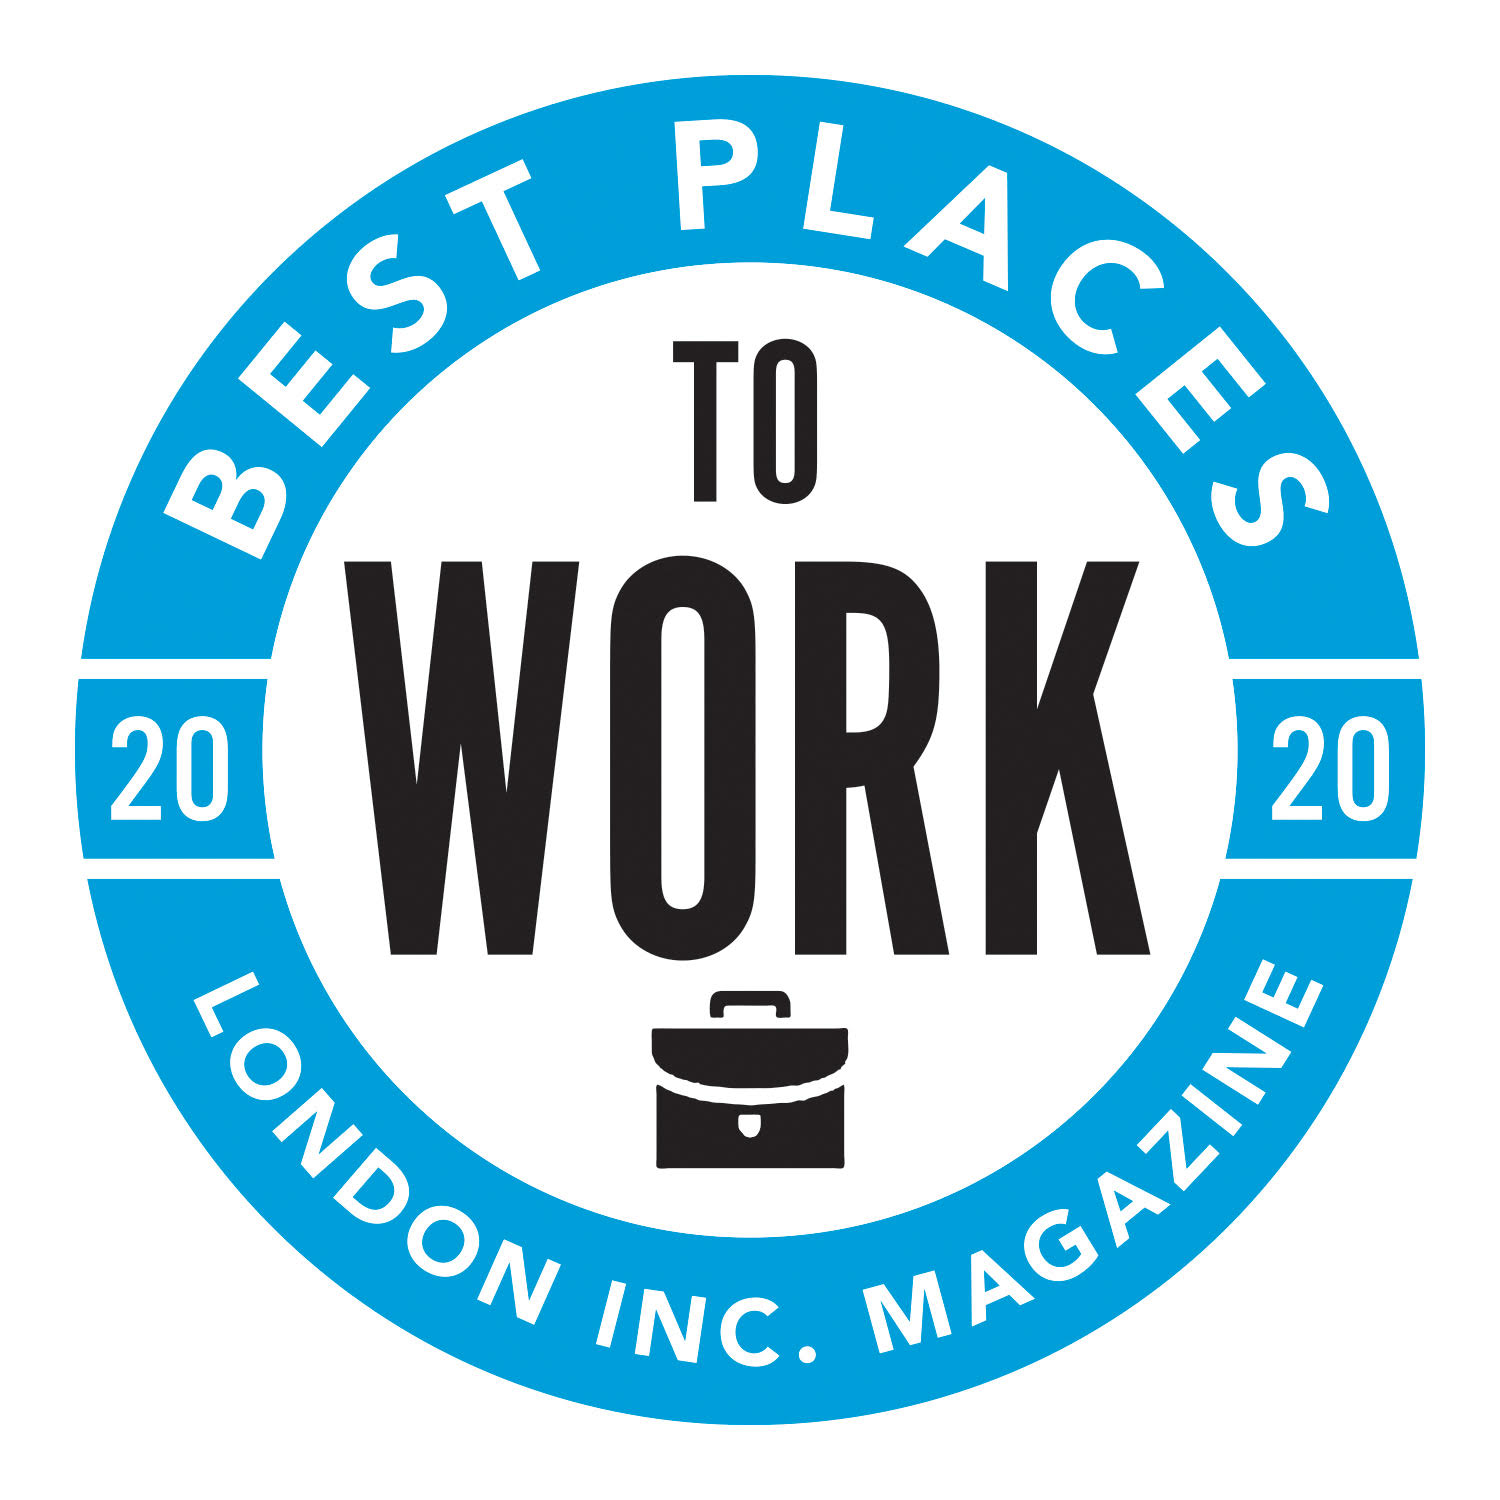 Best Places To Work 2020 | London Inc Magazine